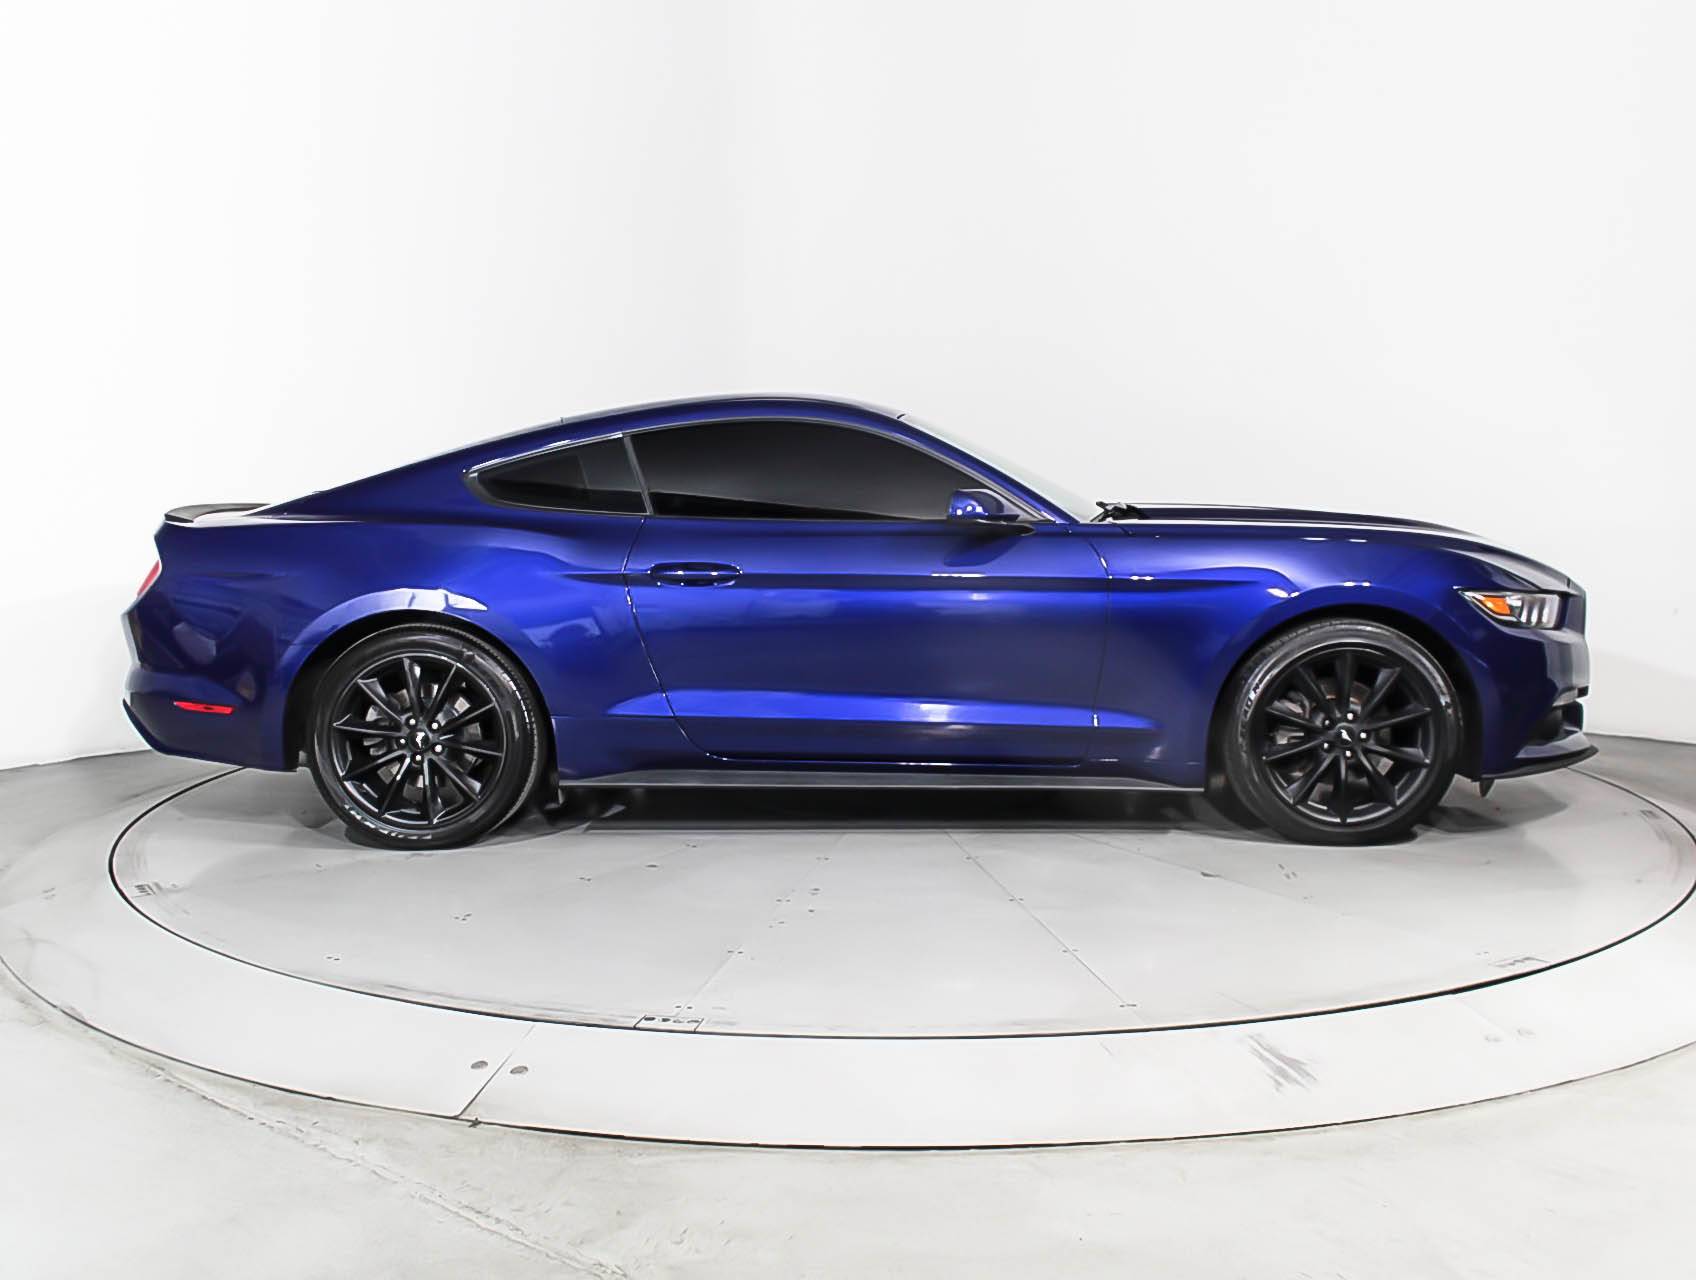 Florida Fine Cars - Used FORD MUSTANG 2015 MIAMI ECOBOOST